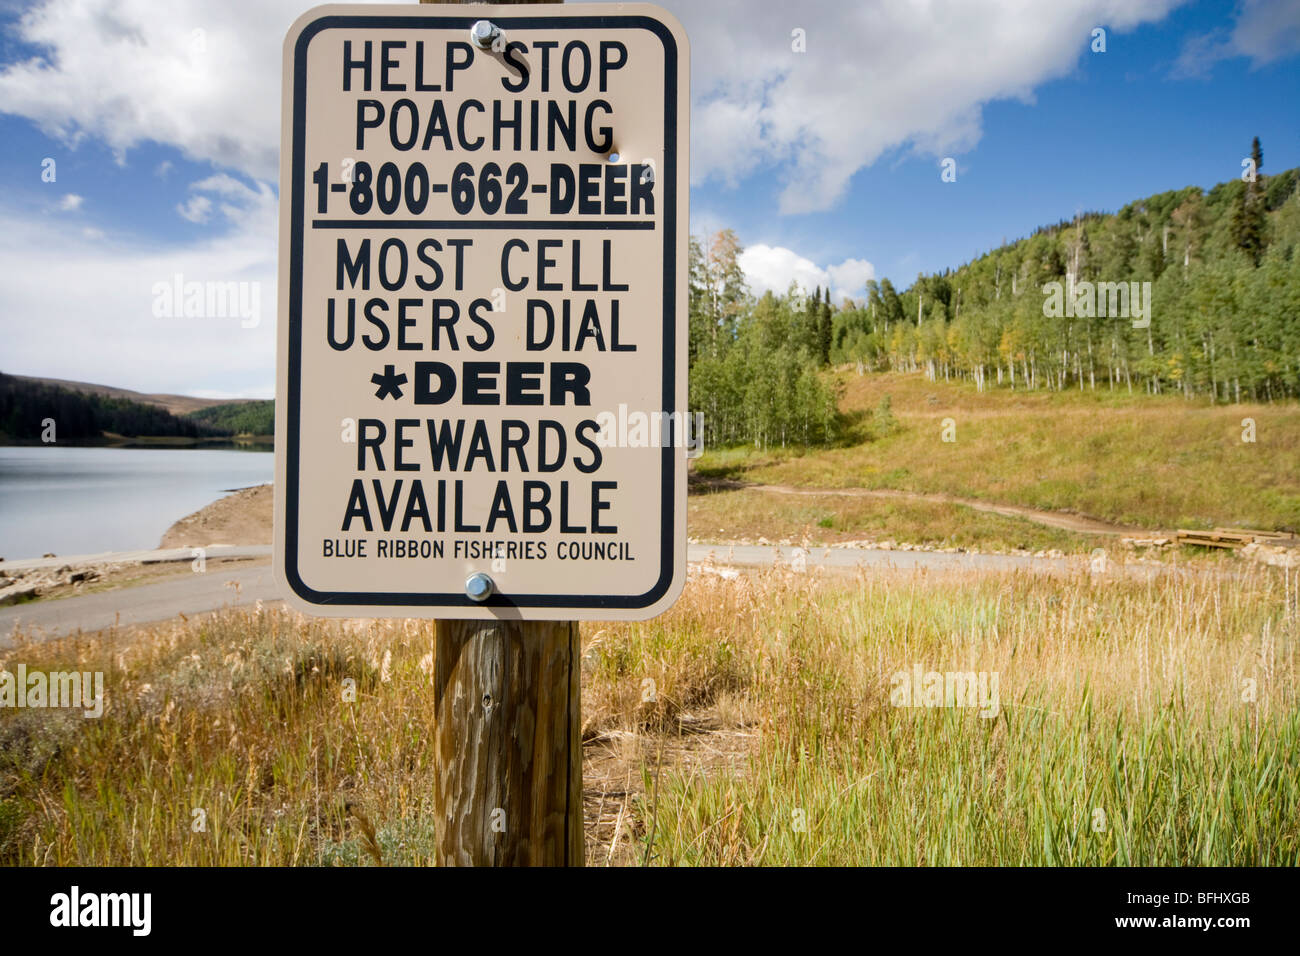 A Help Stop Poaching sign at Huntington (Mammoth) Reservoir along Huntington and Eccles Canyon National Scenic Byway Utah Stock Photo